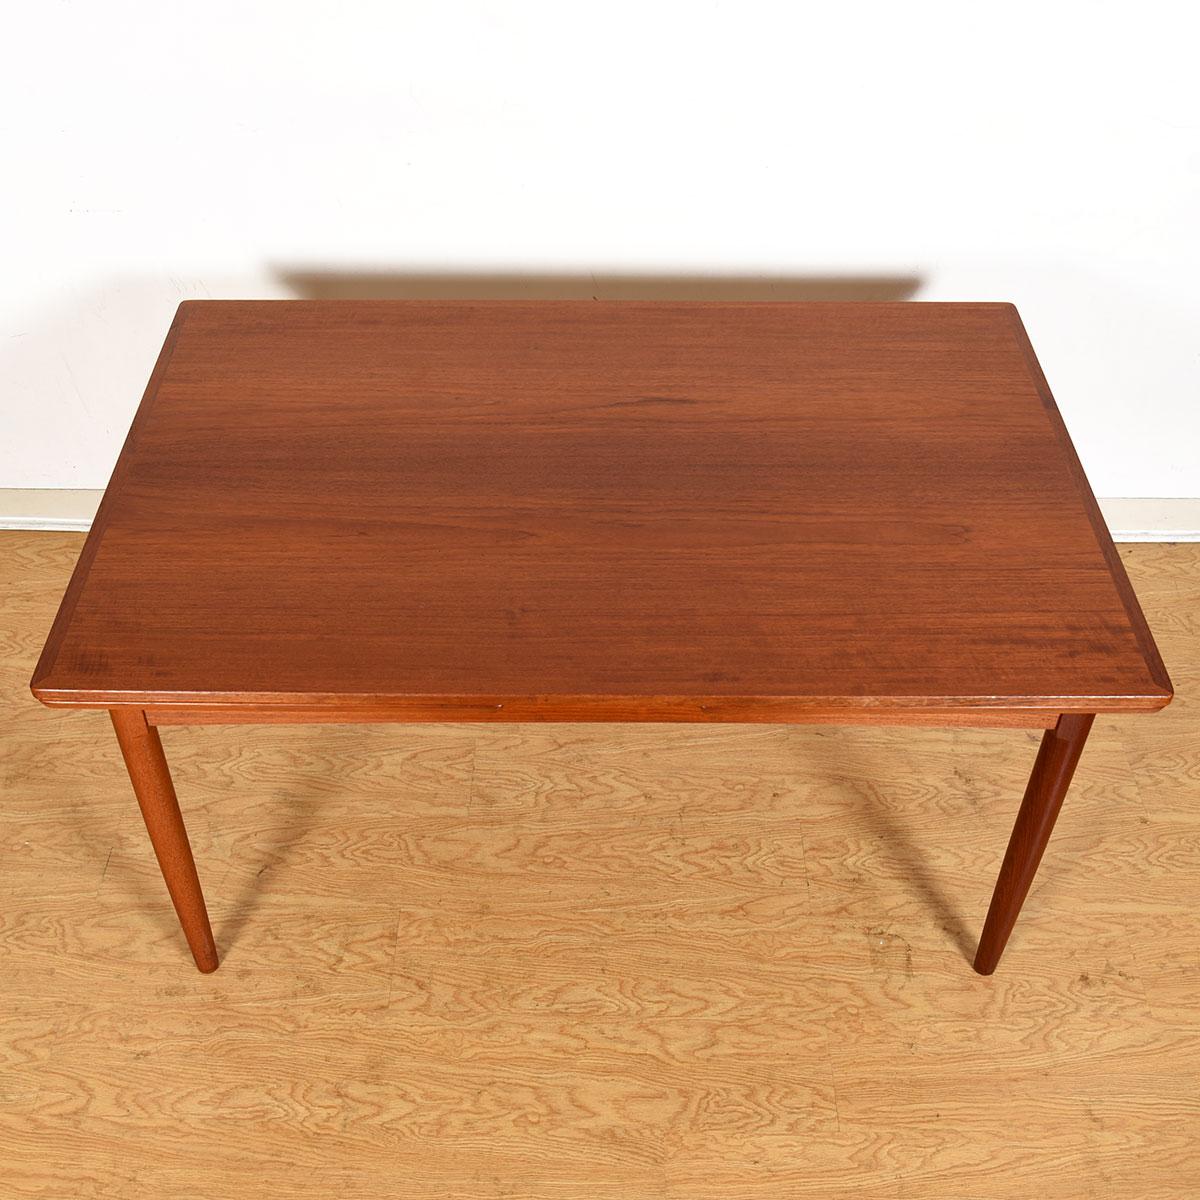 Teak Expanding Danish Modern Mid-Sized Dining Table

Additional information:
Material: Teak

Two Self-Storing Leaves Pull Out From Under The Table’s Top From Either End, Each Adding Approximately 23.5?

Dimension: W 56.75? - 80.25? - 103.75?? x D